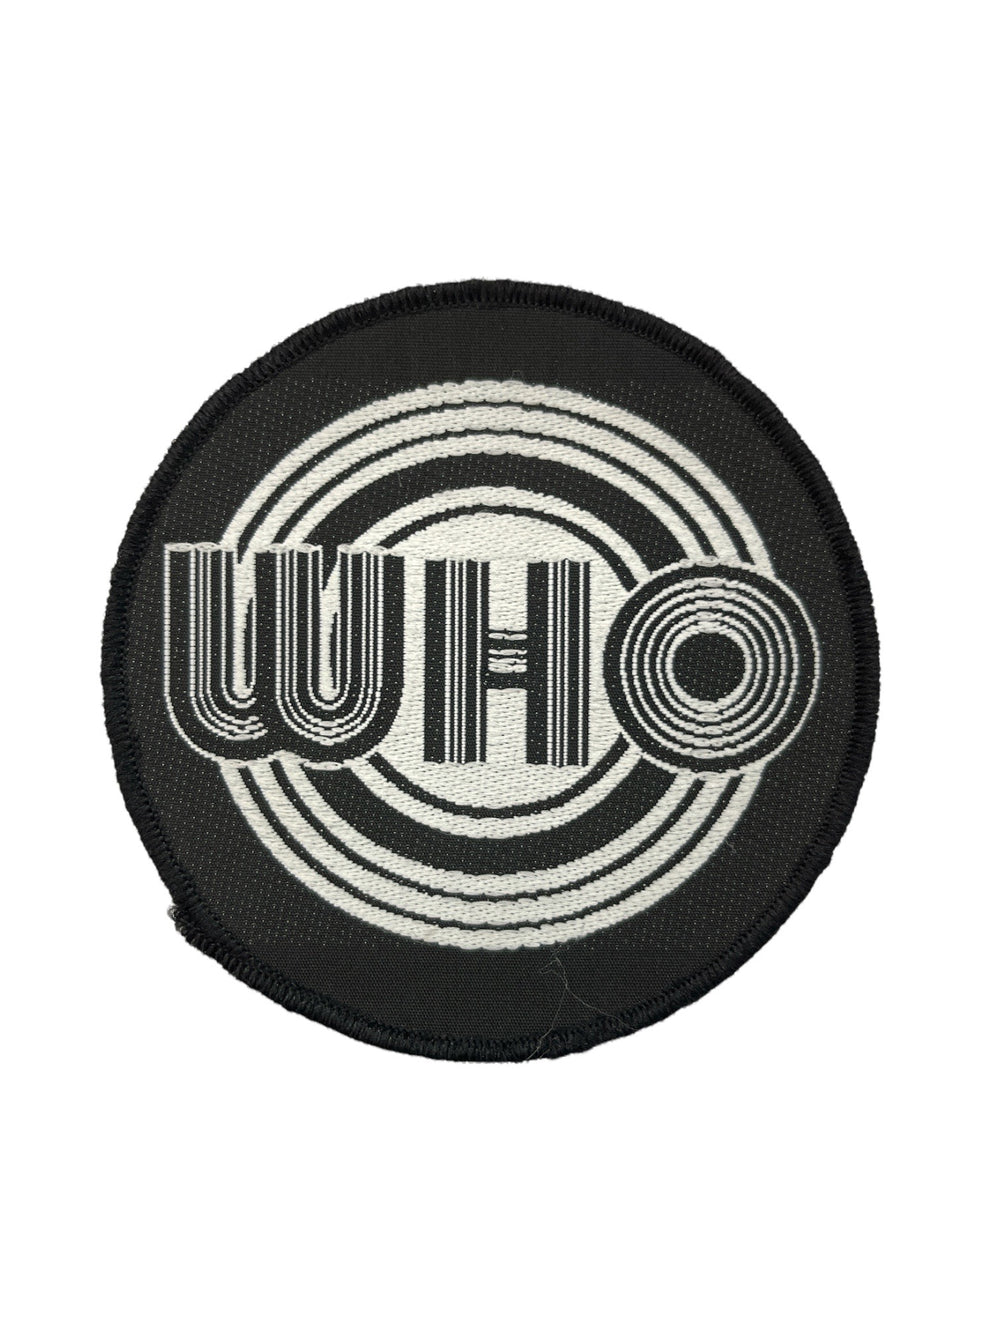 Who The - The Circles Official Woven Patch Brand New